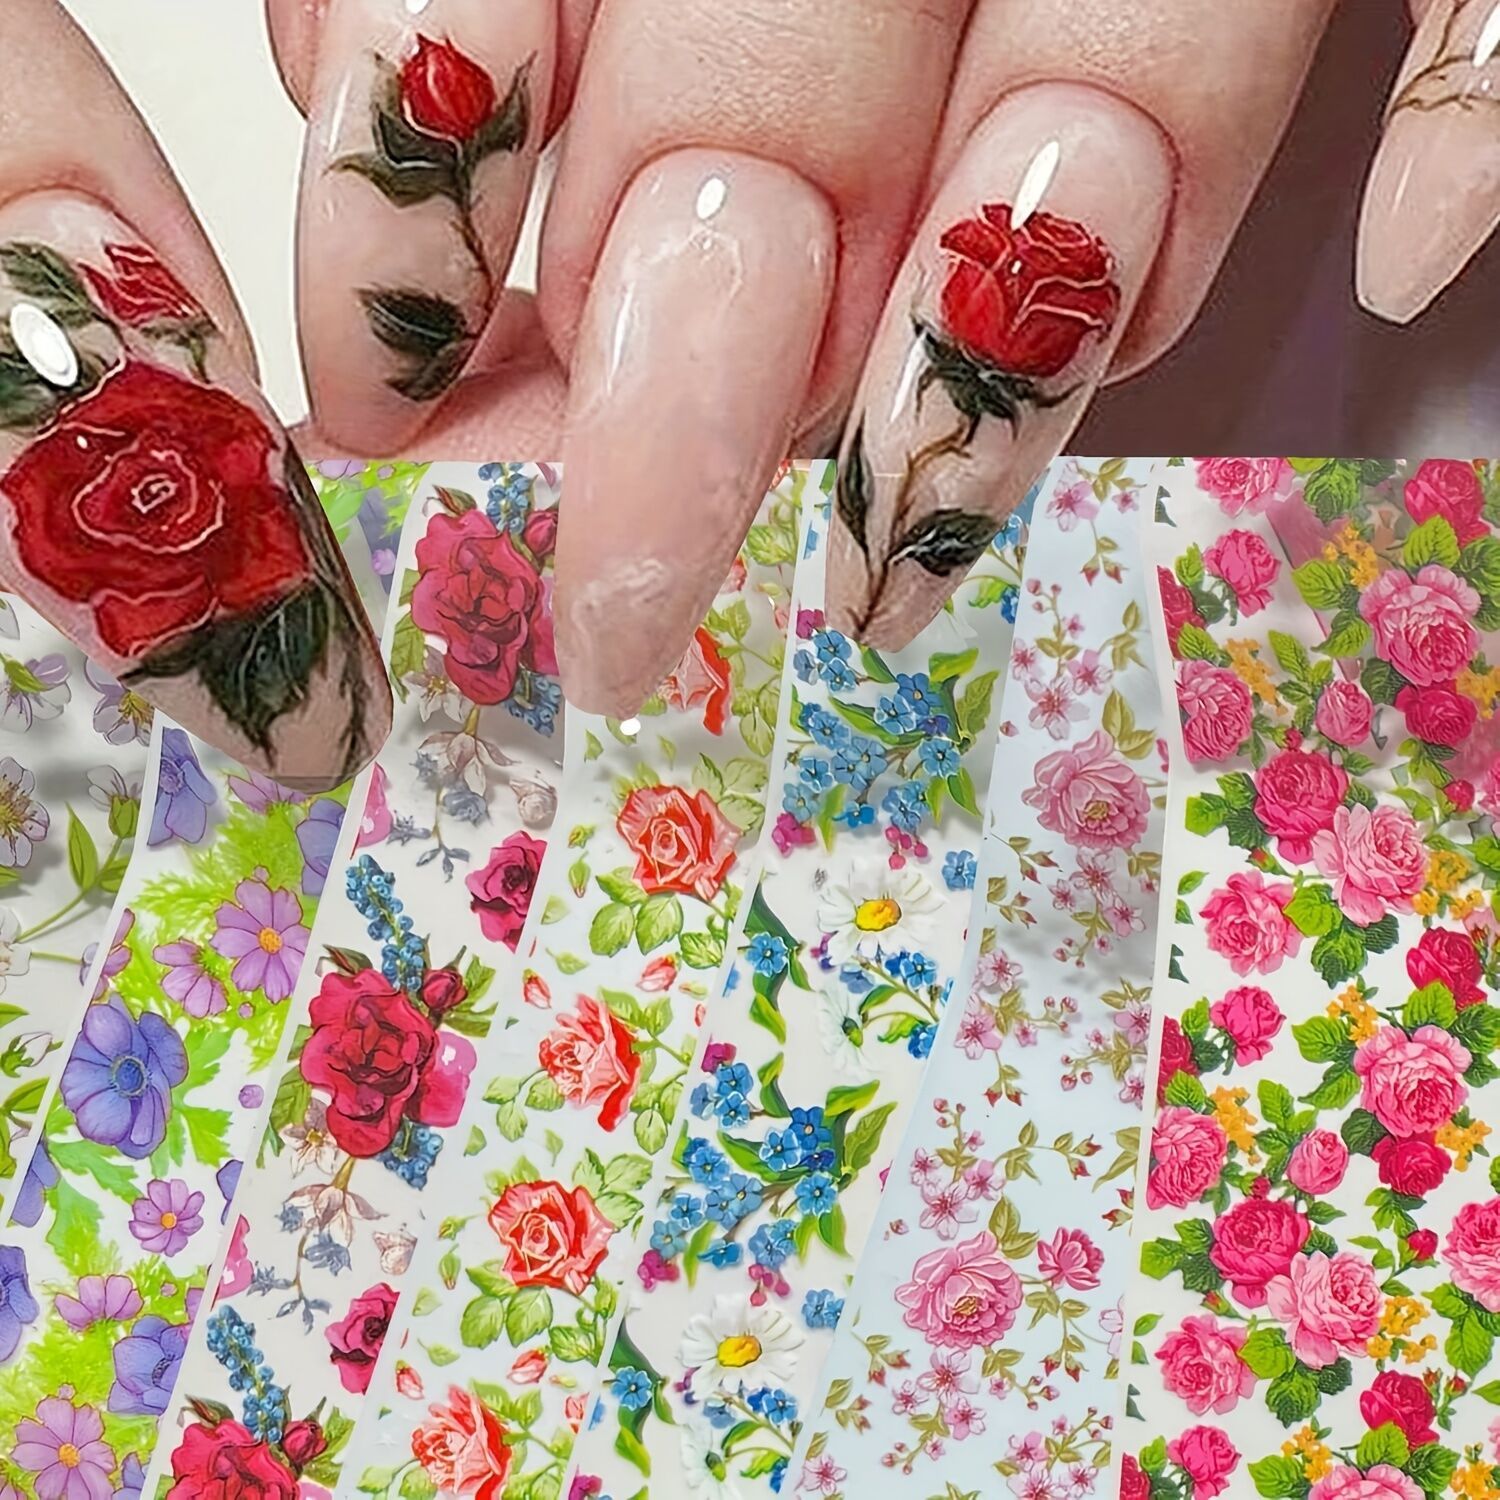 10pcs Rose Flower Patterns Transfer Foil Nail Art Valentines Floral Leaves  Starry Nail Foil Sticker Decal Adhesive Wraps